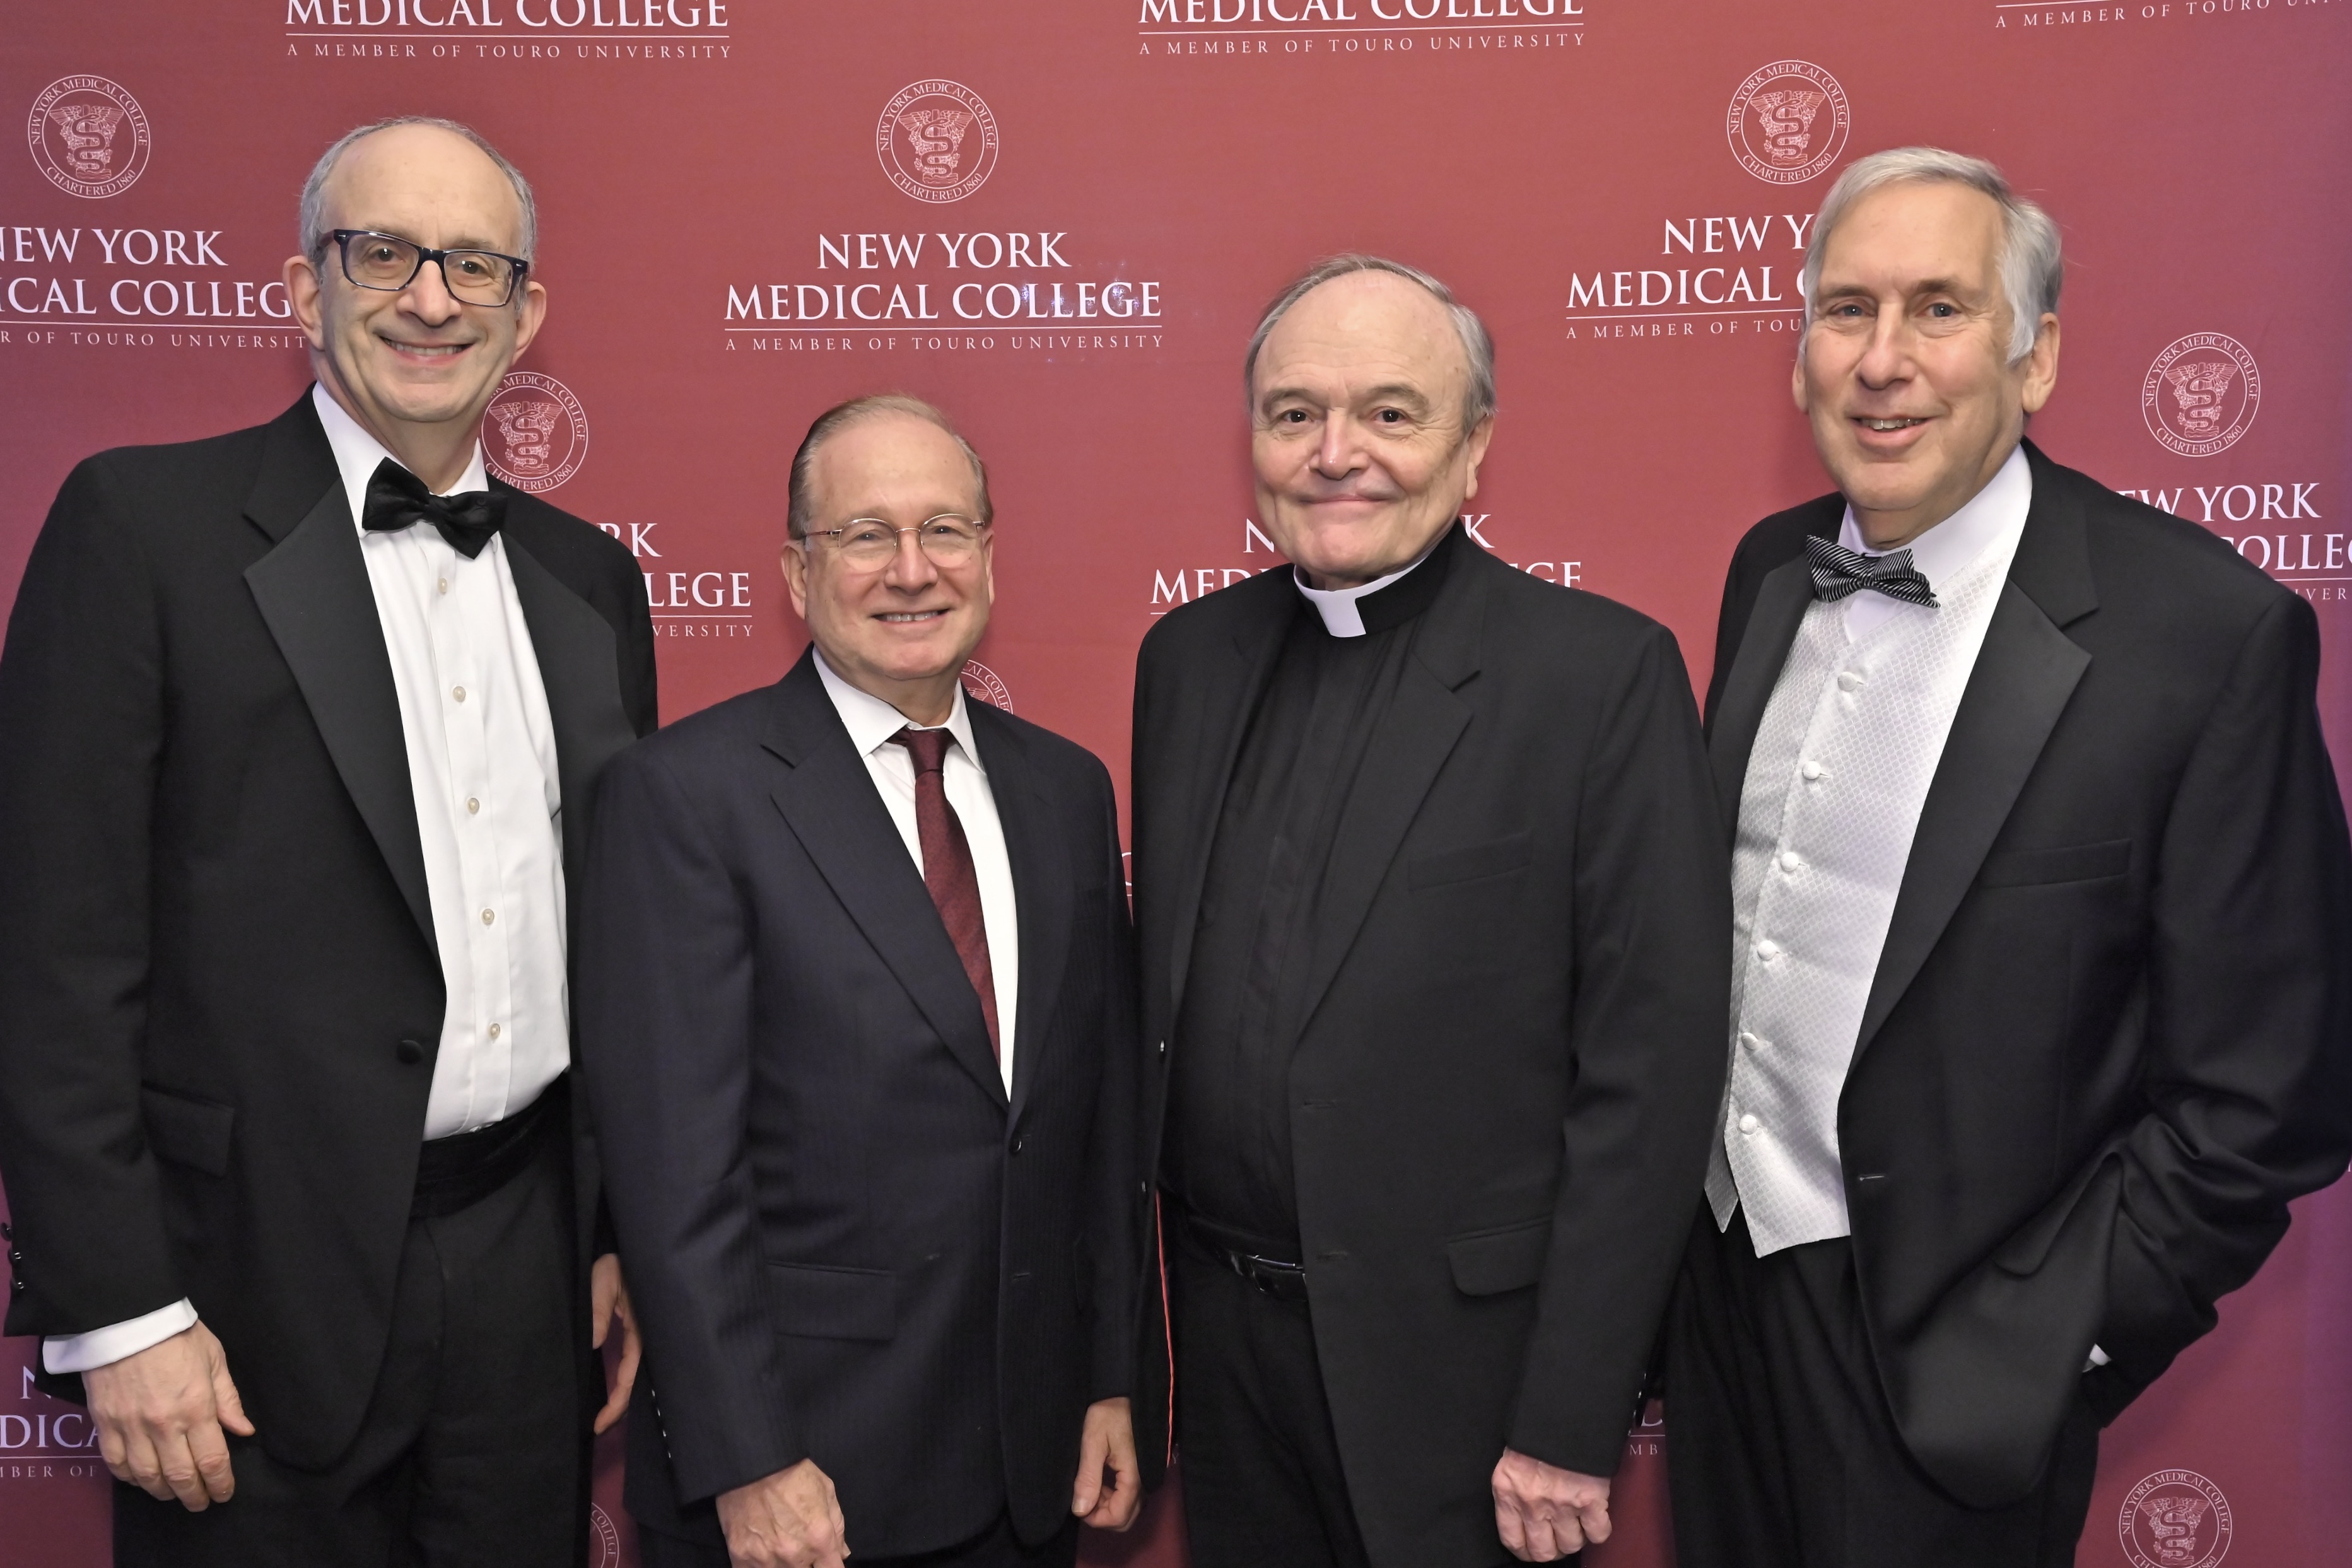 Four men in suits smiling in front of NYMC backdrop